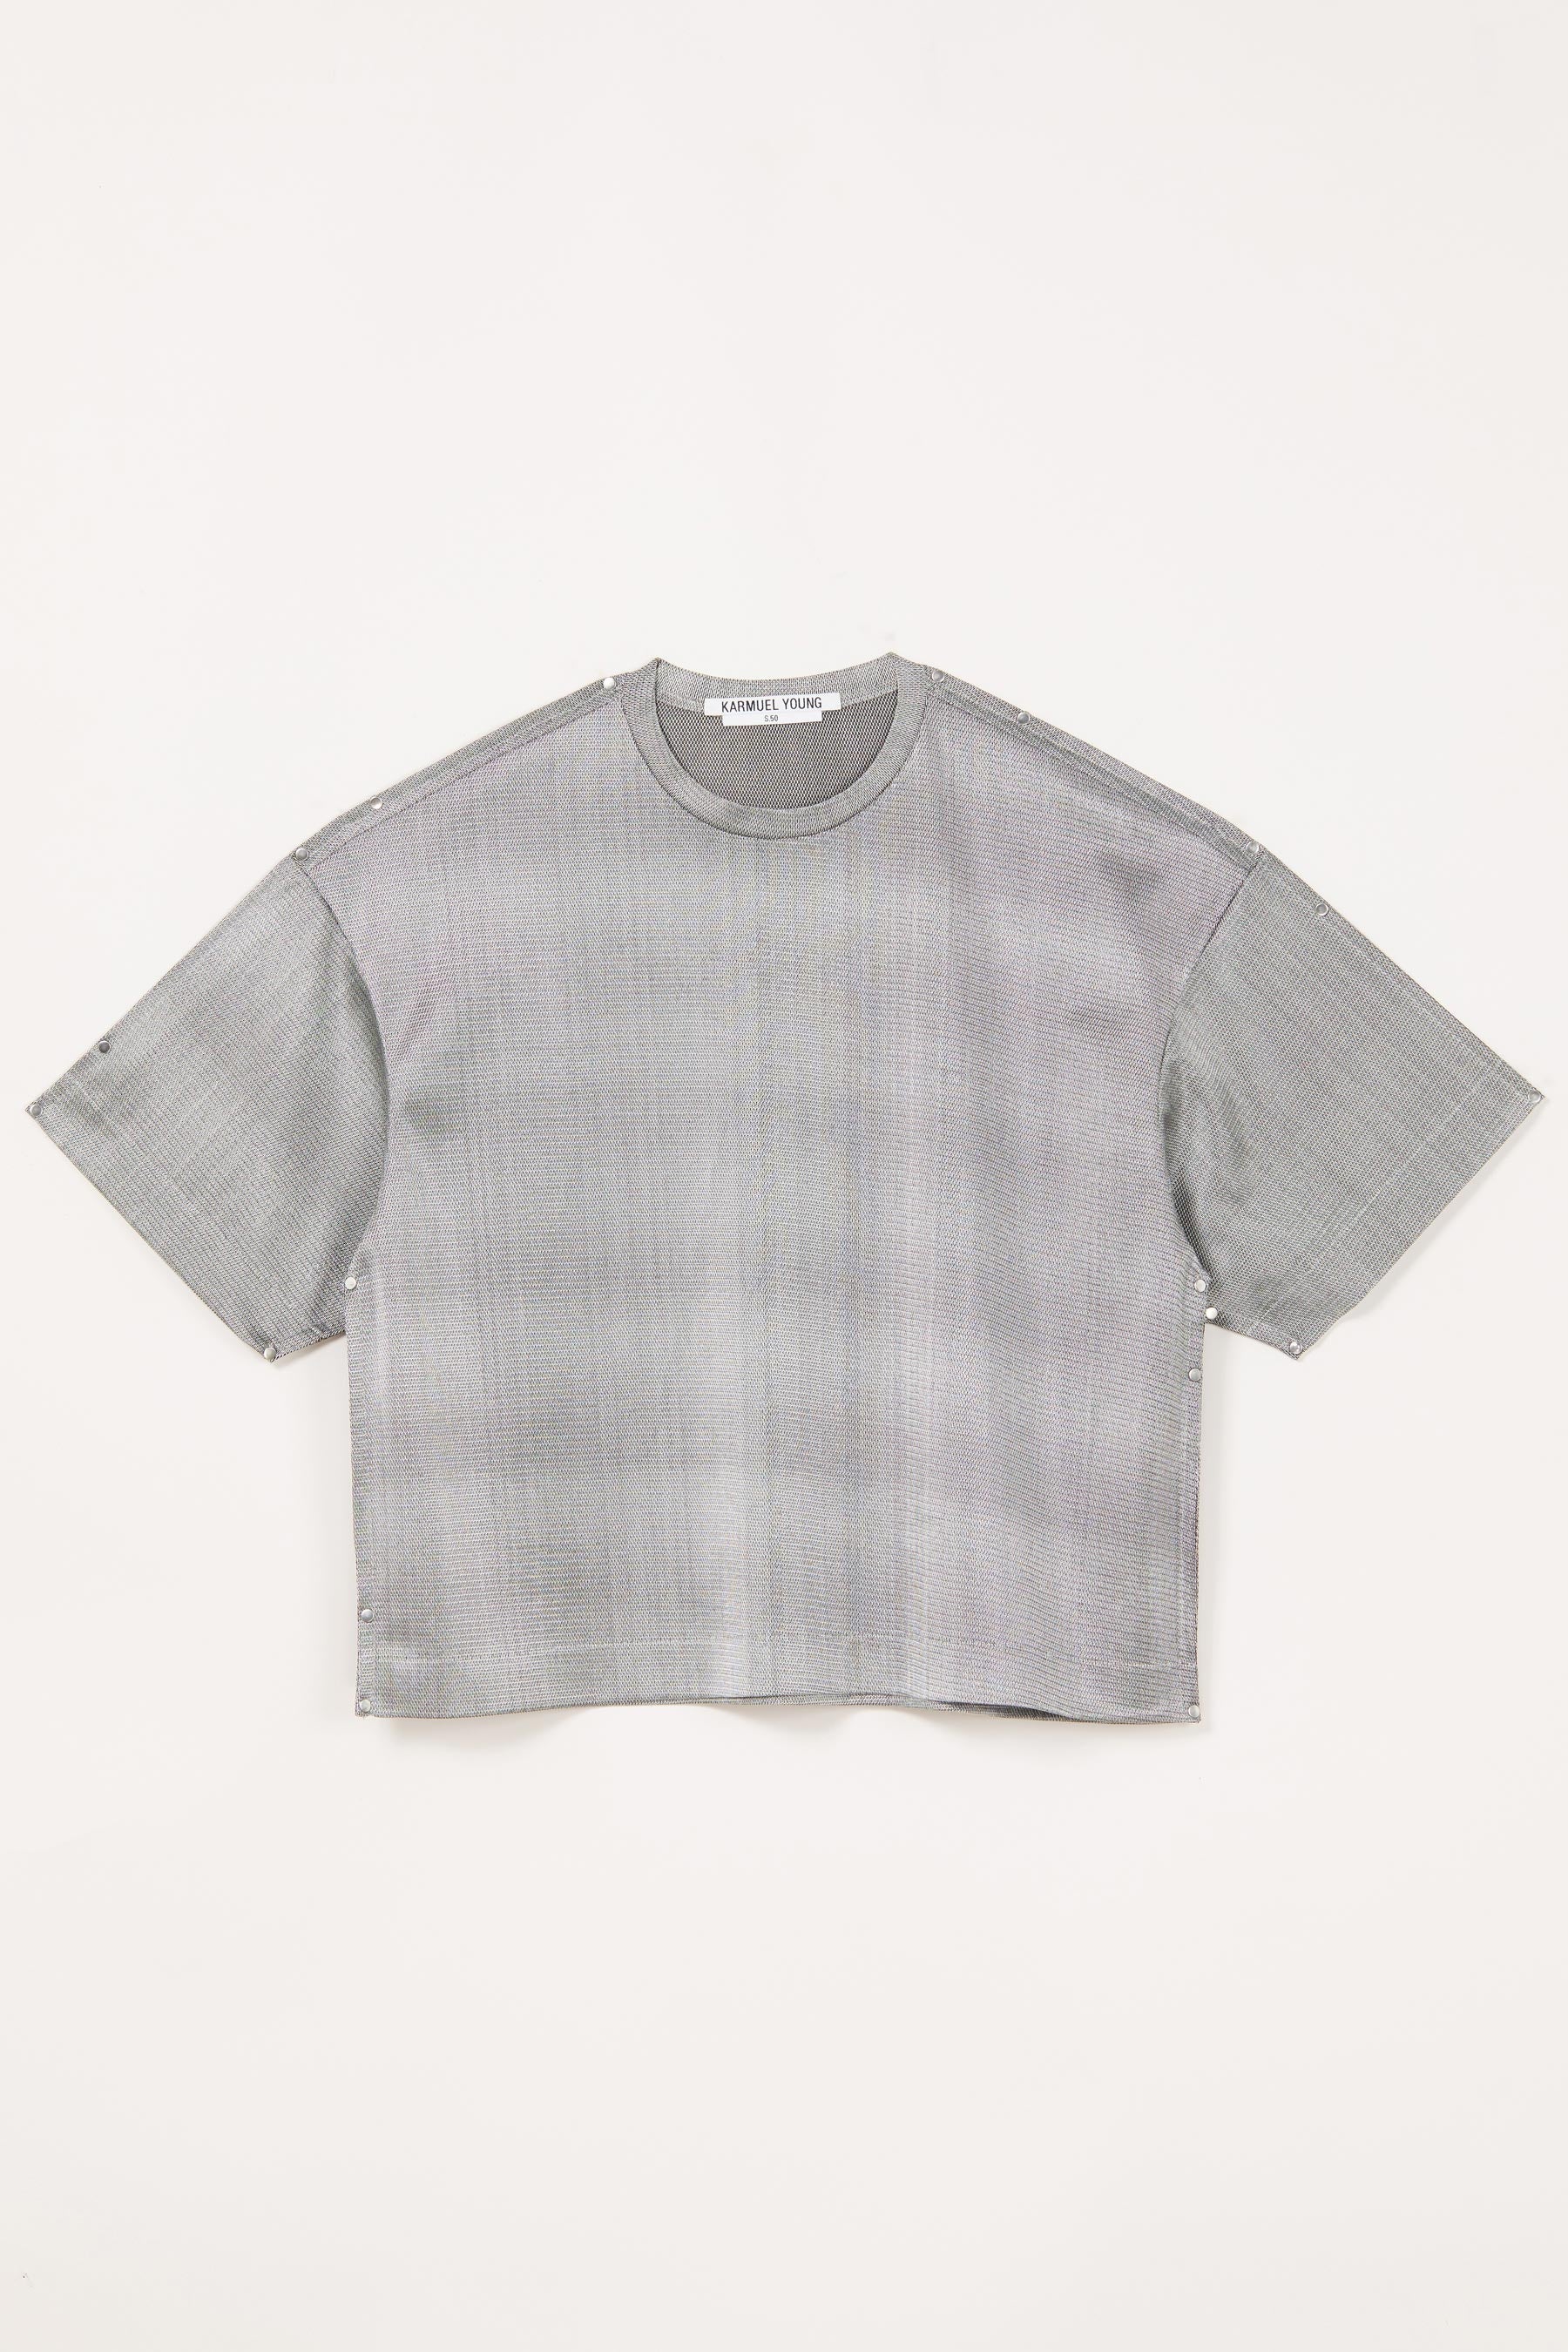 Silver Polyester Nylon Square XY-plane T-Shirt with Studs